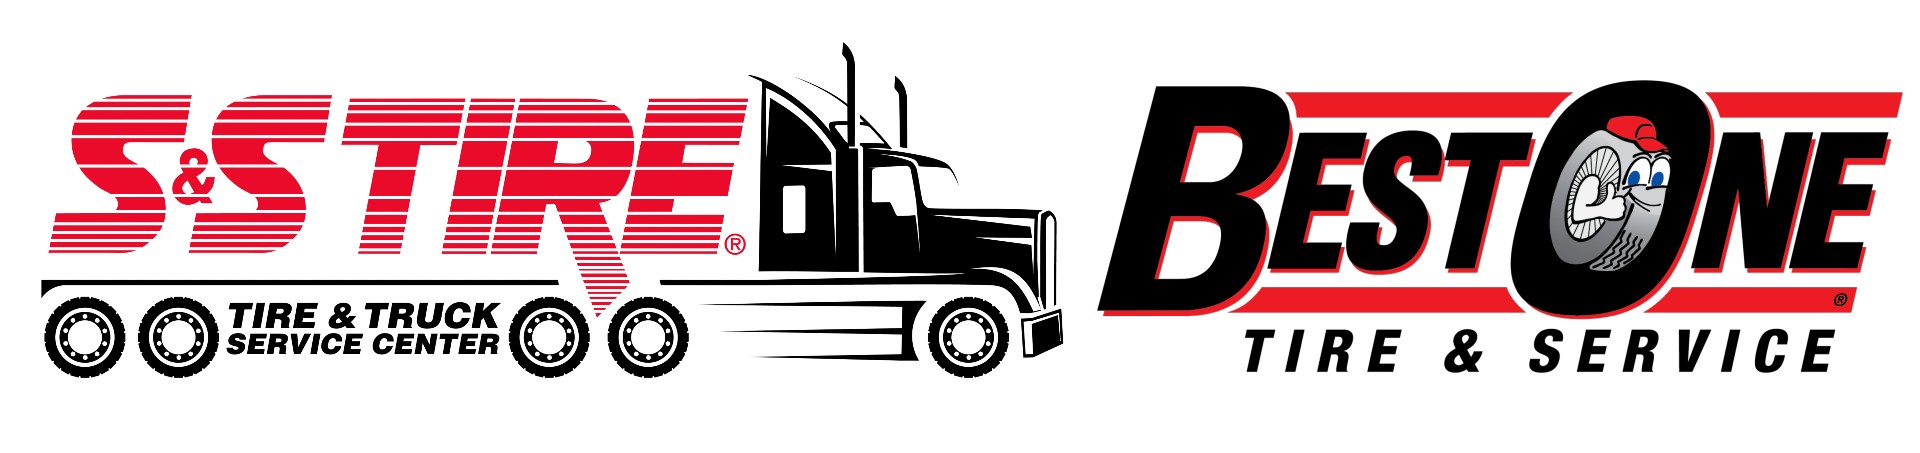 SS Tire and Best One Logo